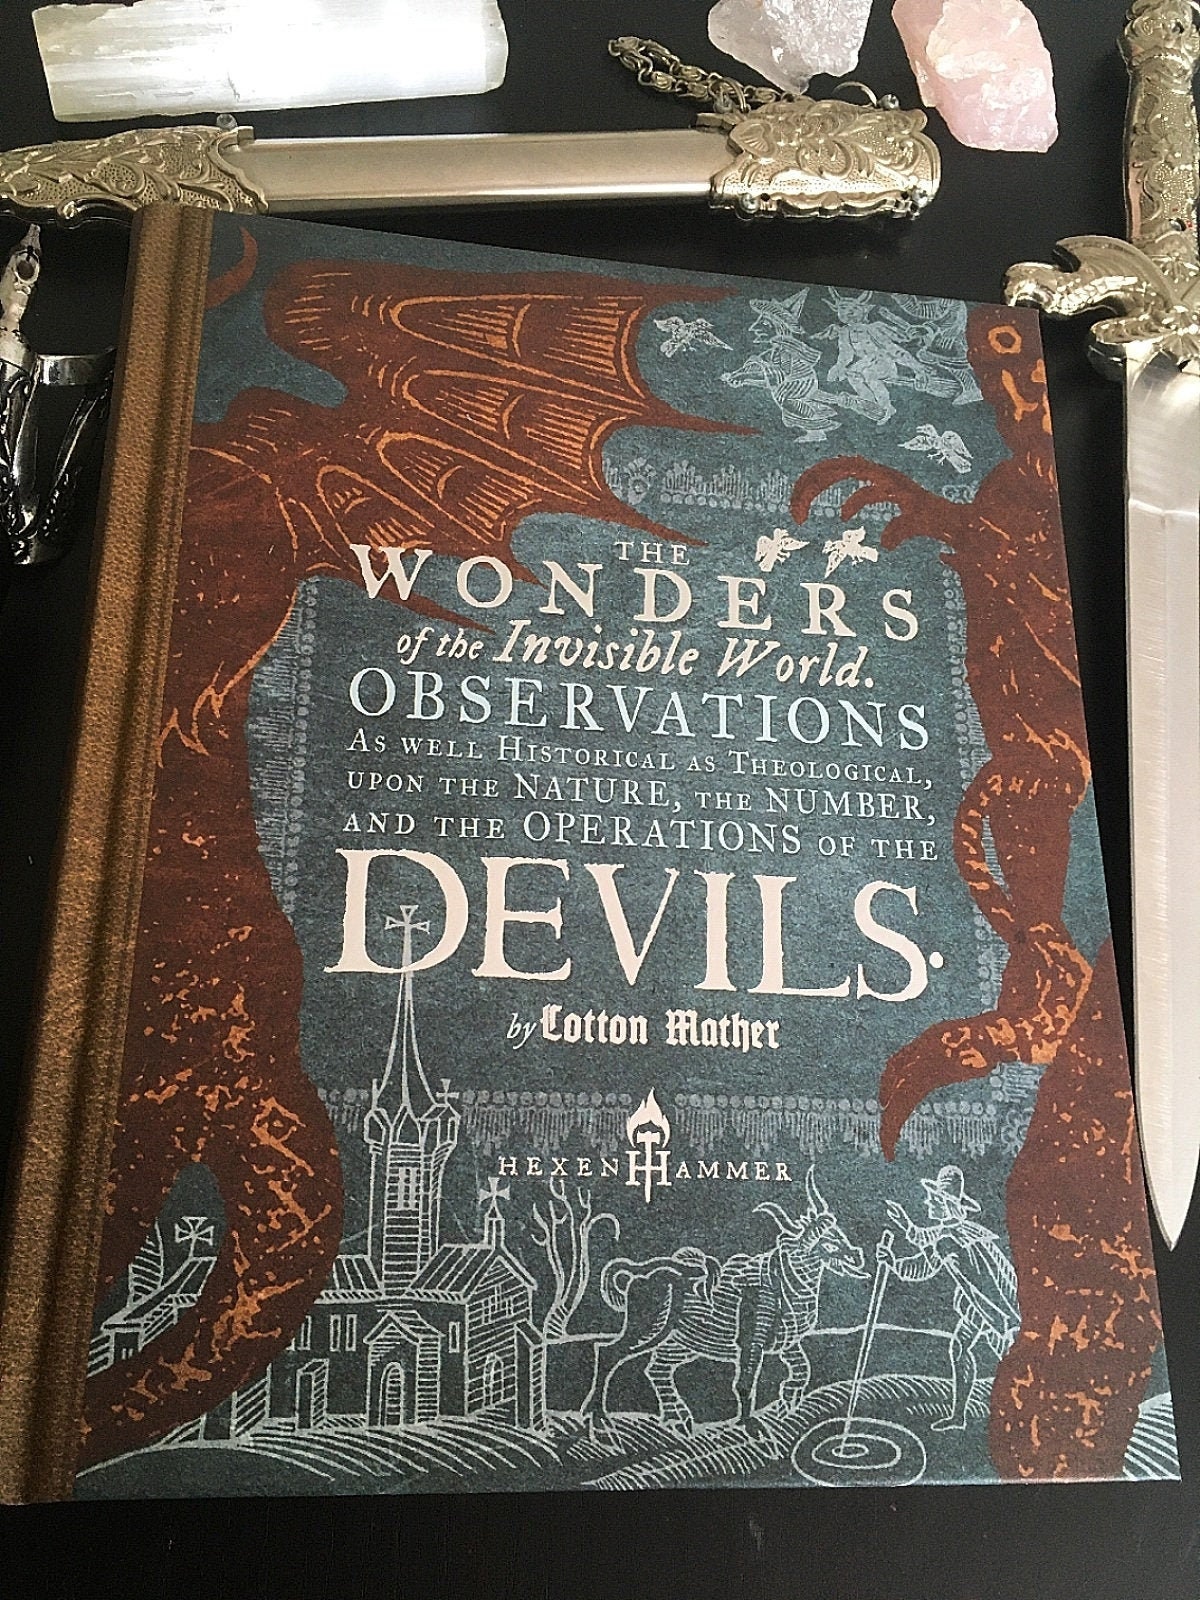 The Wonders of the Invisible World by Cotton Mather Hand-numbered  Collector's Edition Rare Occult Book 